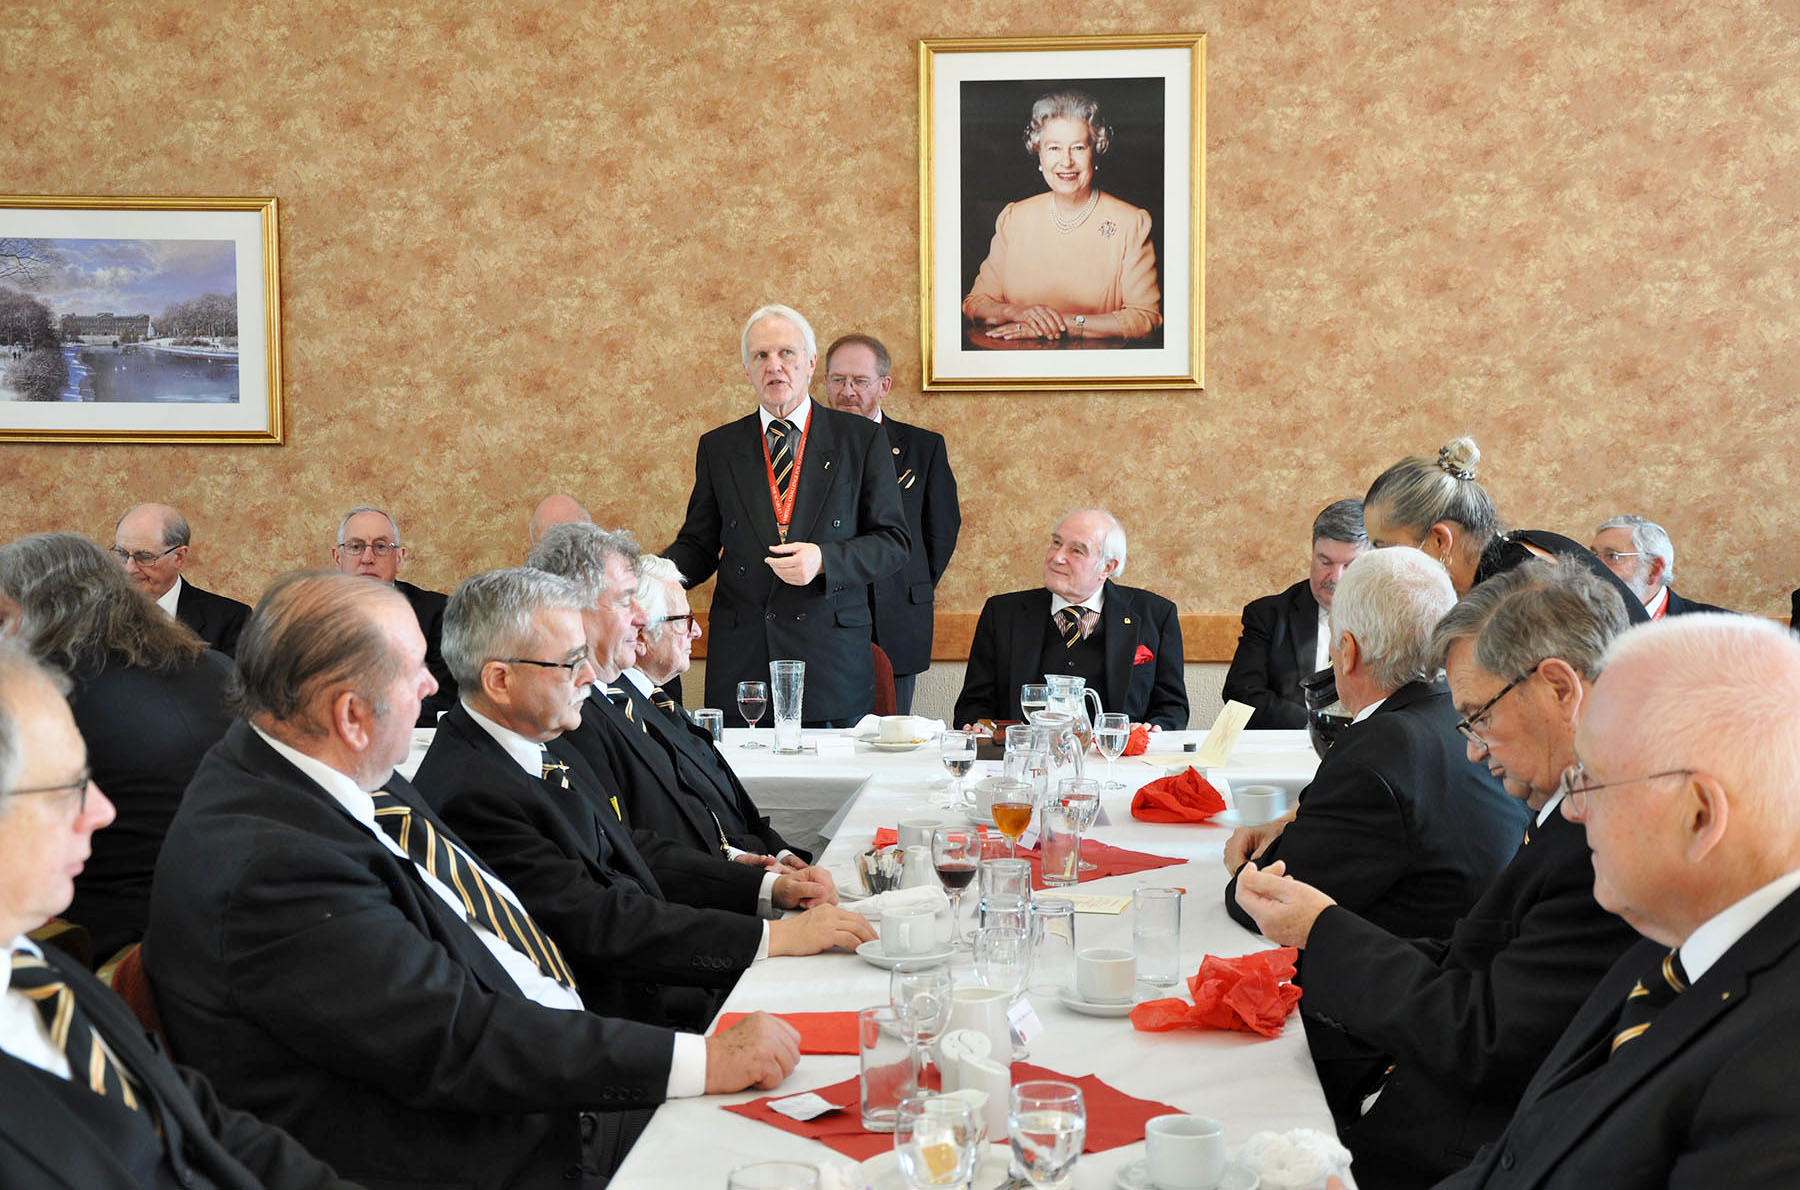 The Installation of a New Provincial Grand Summus